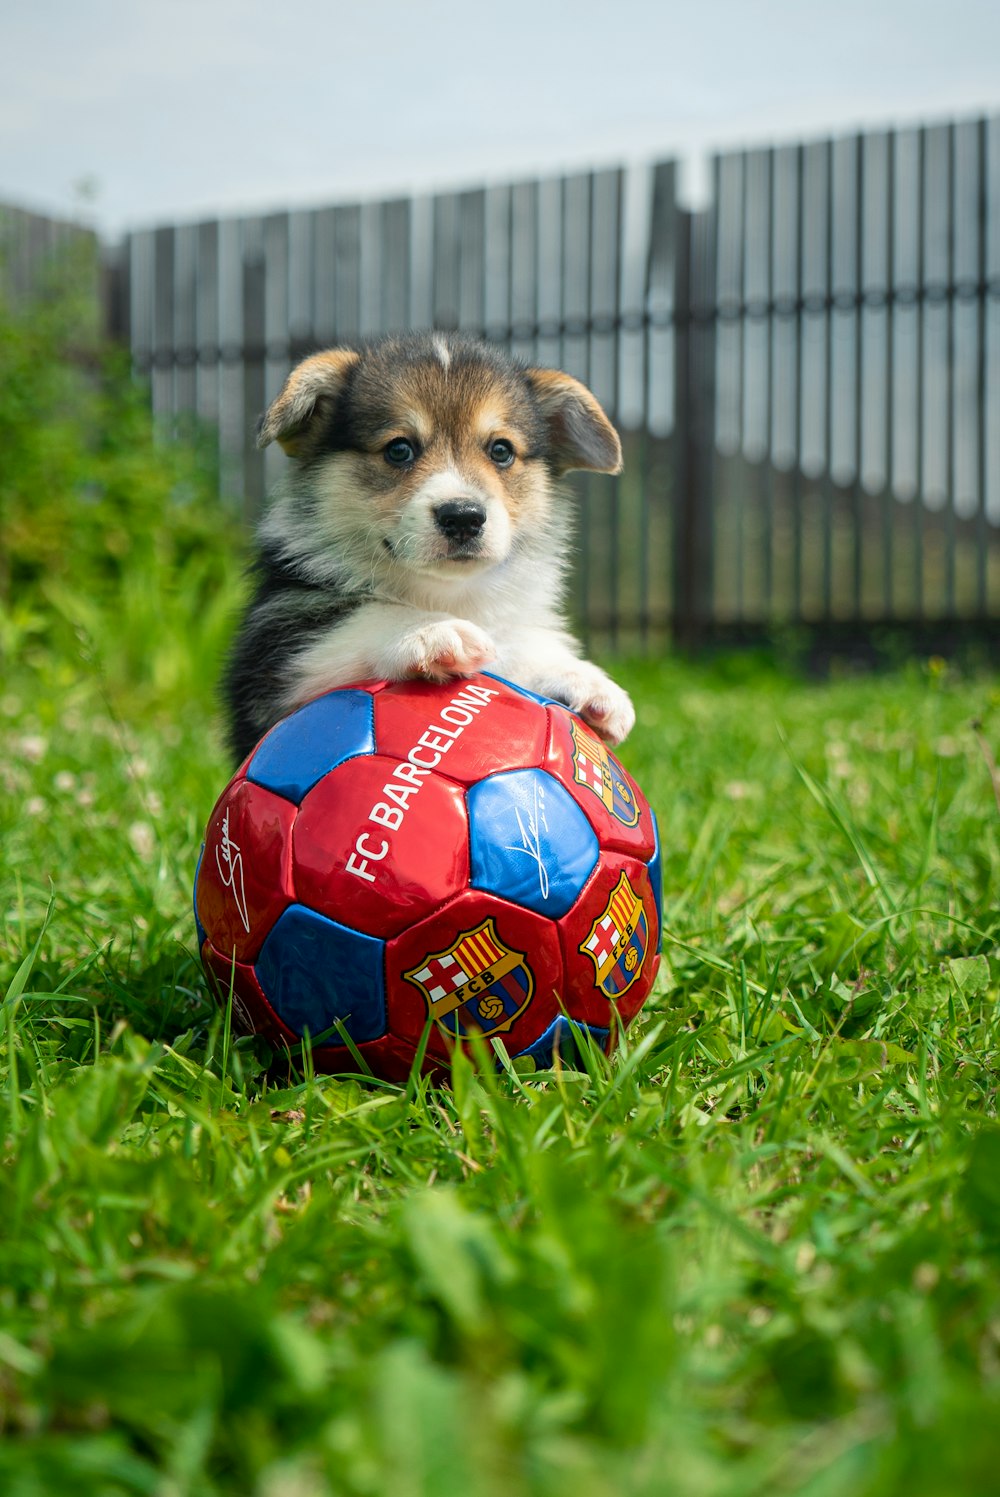 Dog With Ball Pictures | Download Free Images on Unsplash